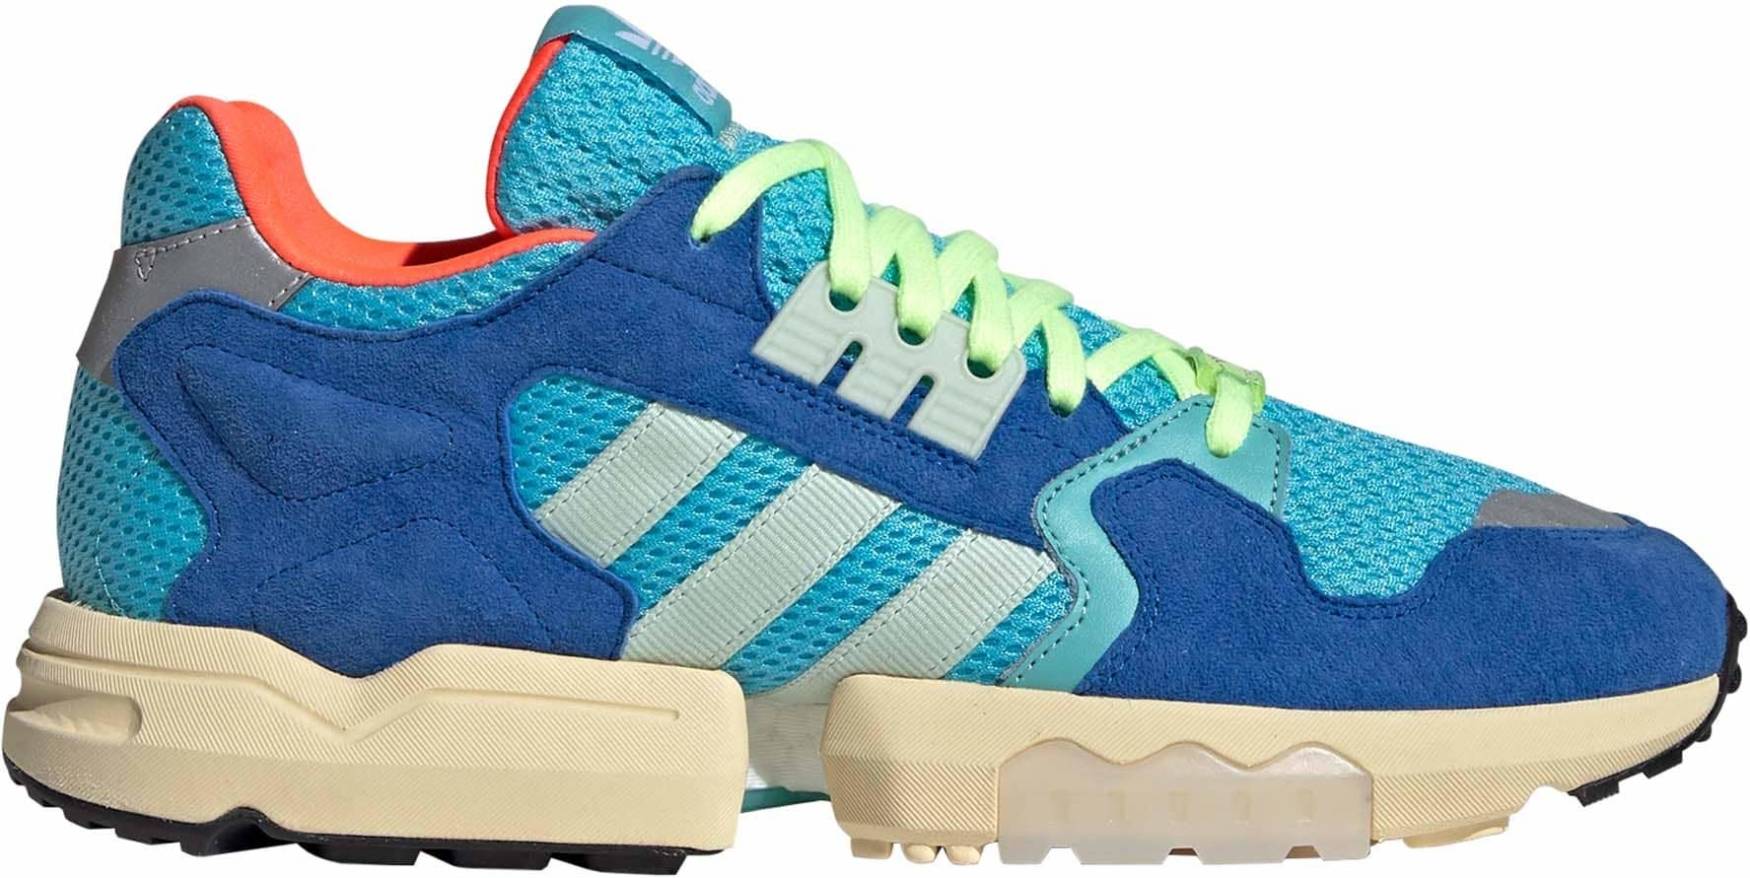 Adidas ZX Torsion sneakers in 9 colors (only $45) | RunRepeat